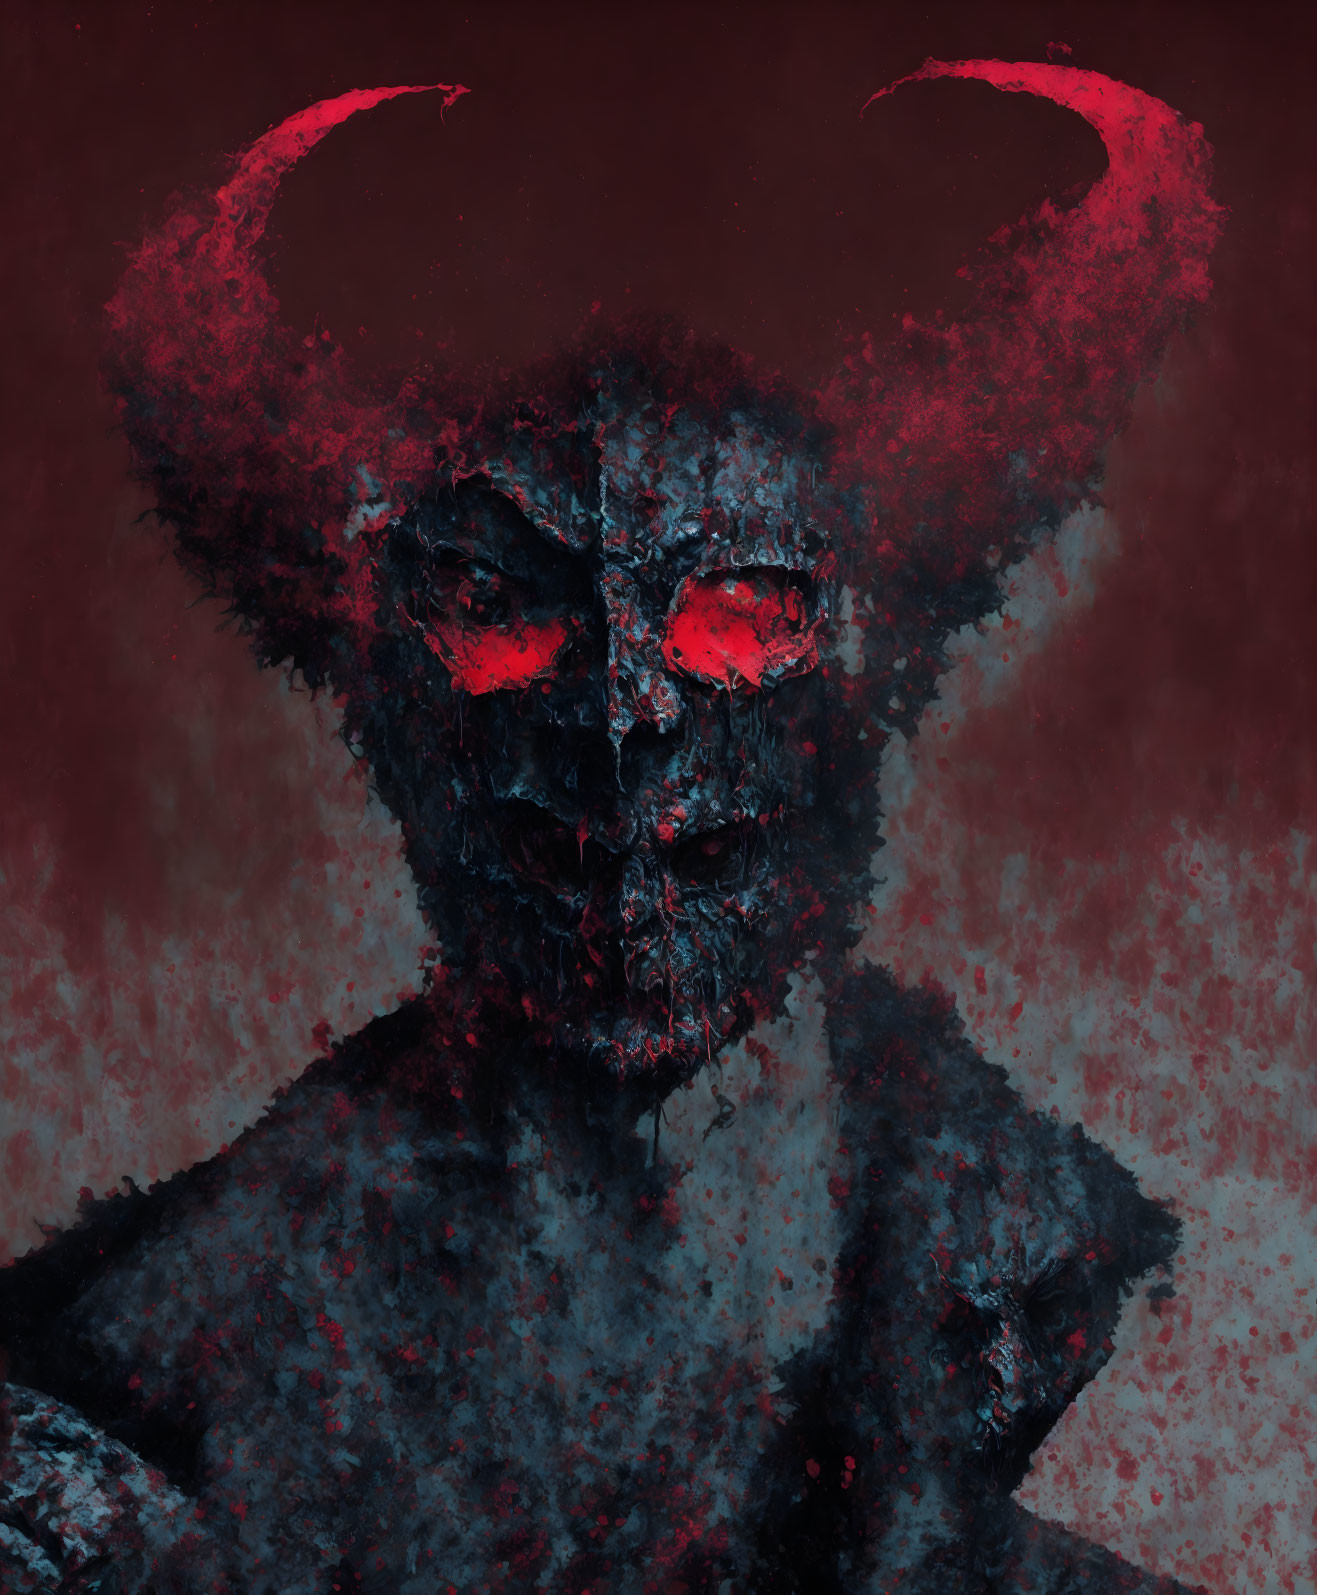 Sinister figure with glowing red eyes and horns on dark crimson background